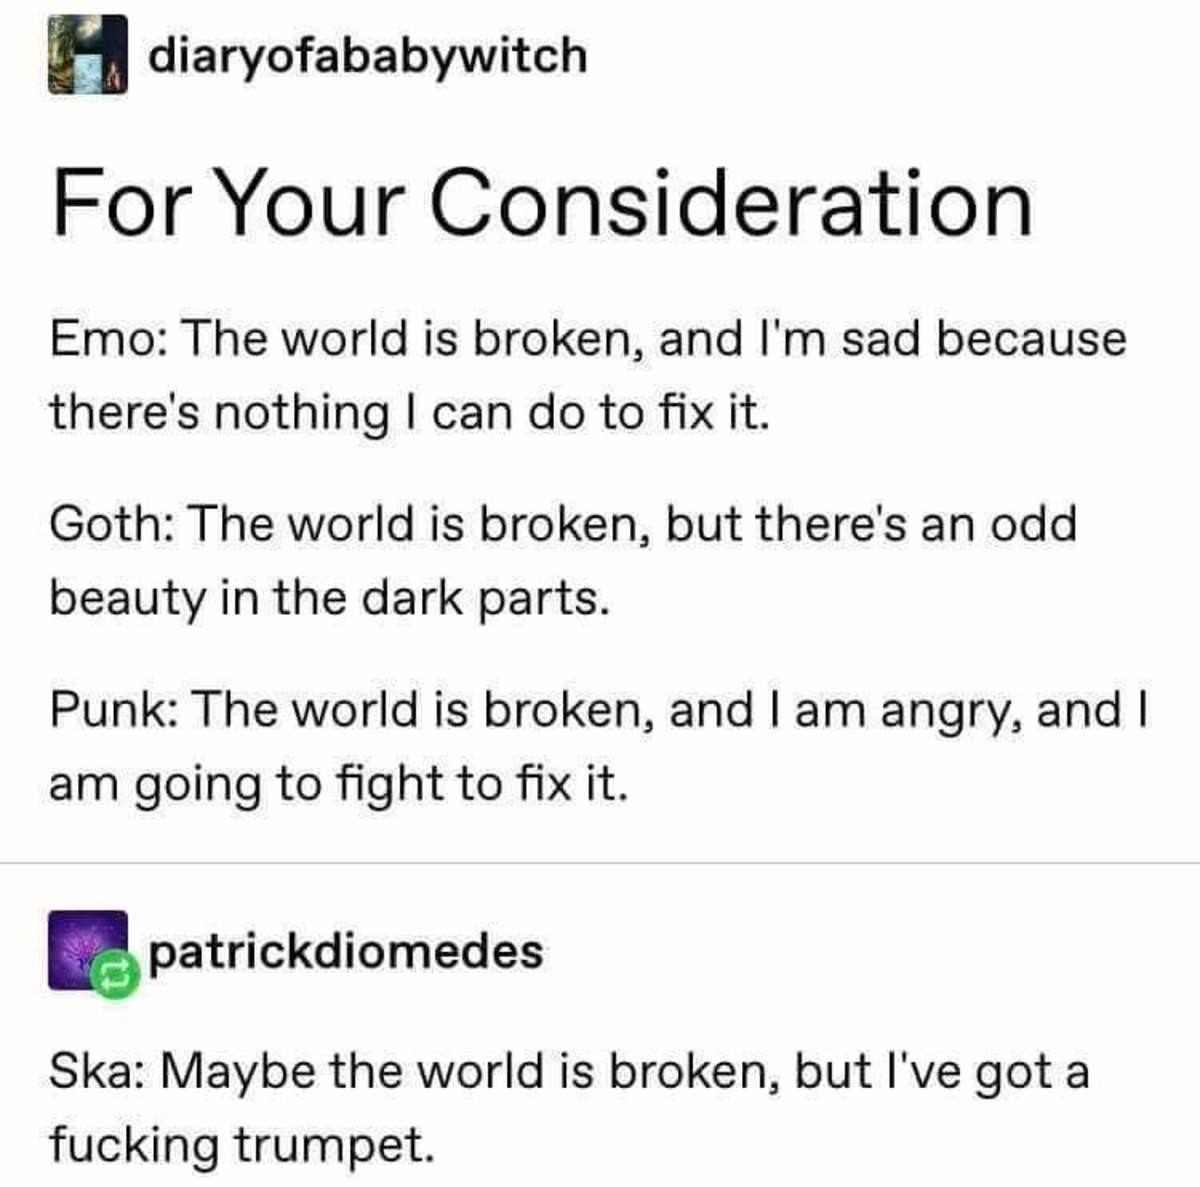 greased cartridges meaning in urdu - diaryofababywitch For Your Consideration Emo The world is broken, and I'm sad because there's nothing I can do to fix it. Goth The world is broken, but there's an odd beauty in the dark parts. Punk The world is broken,